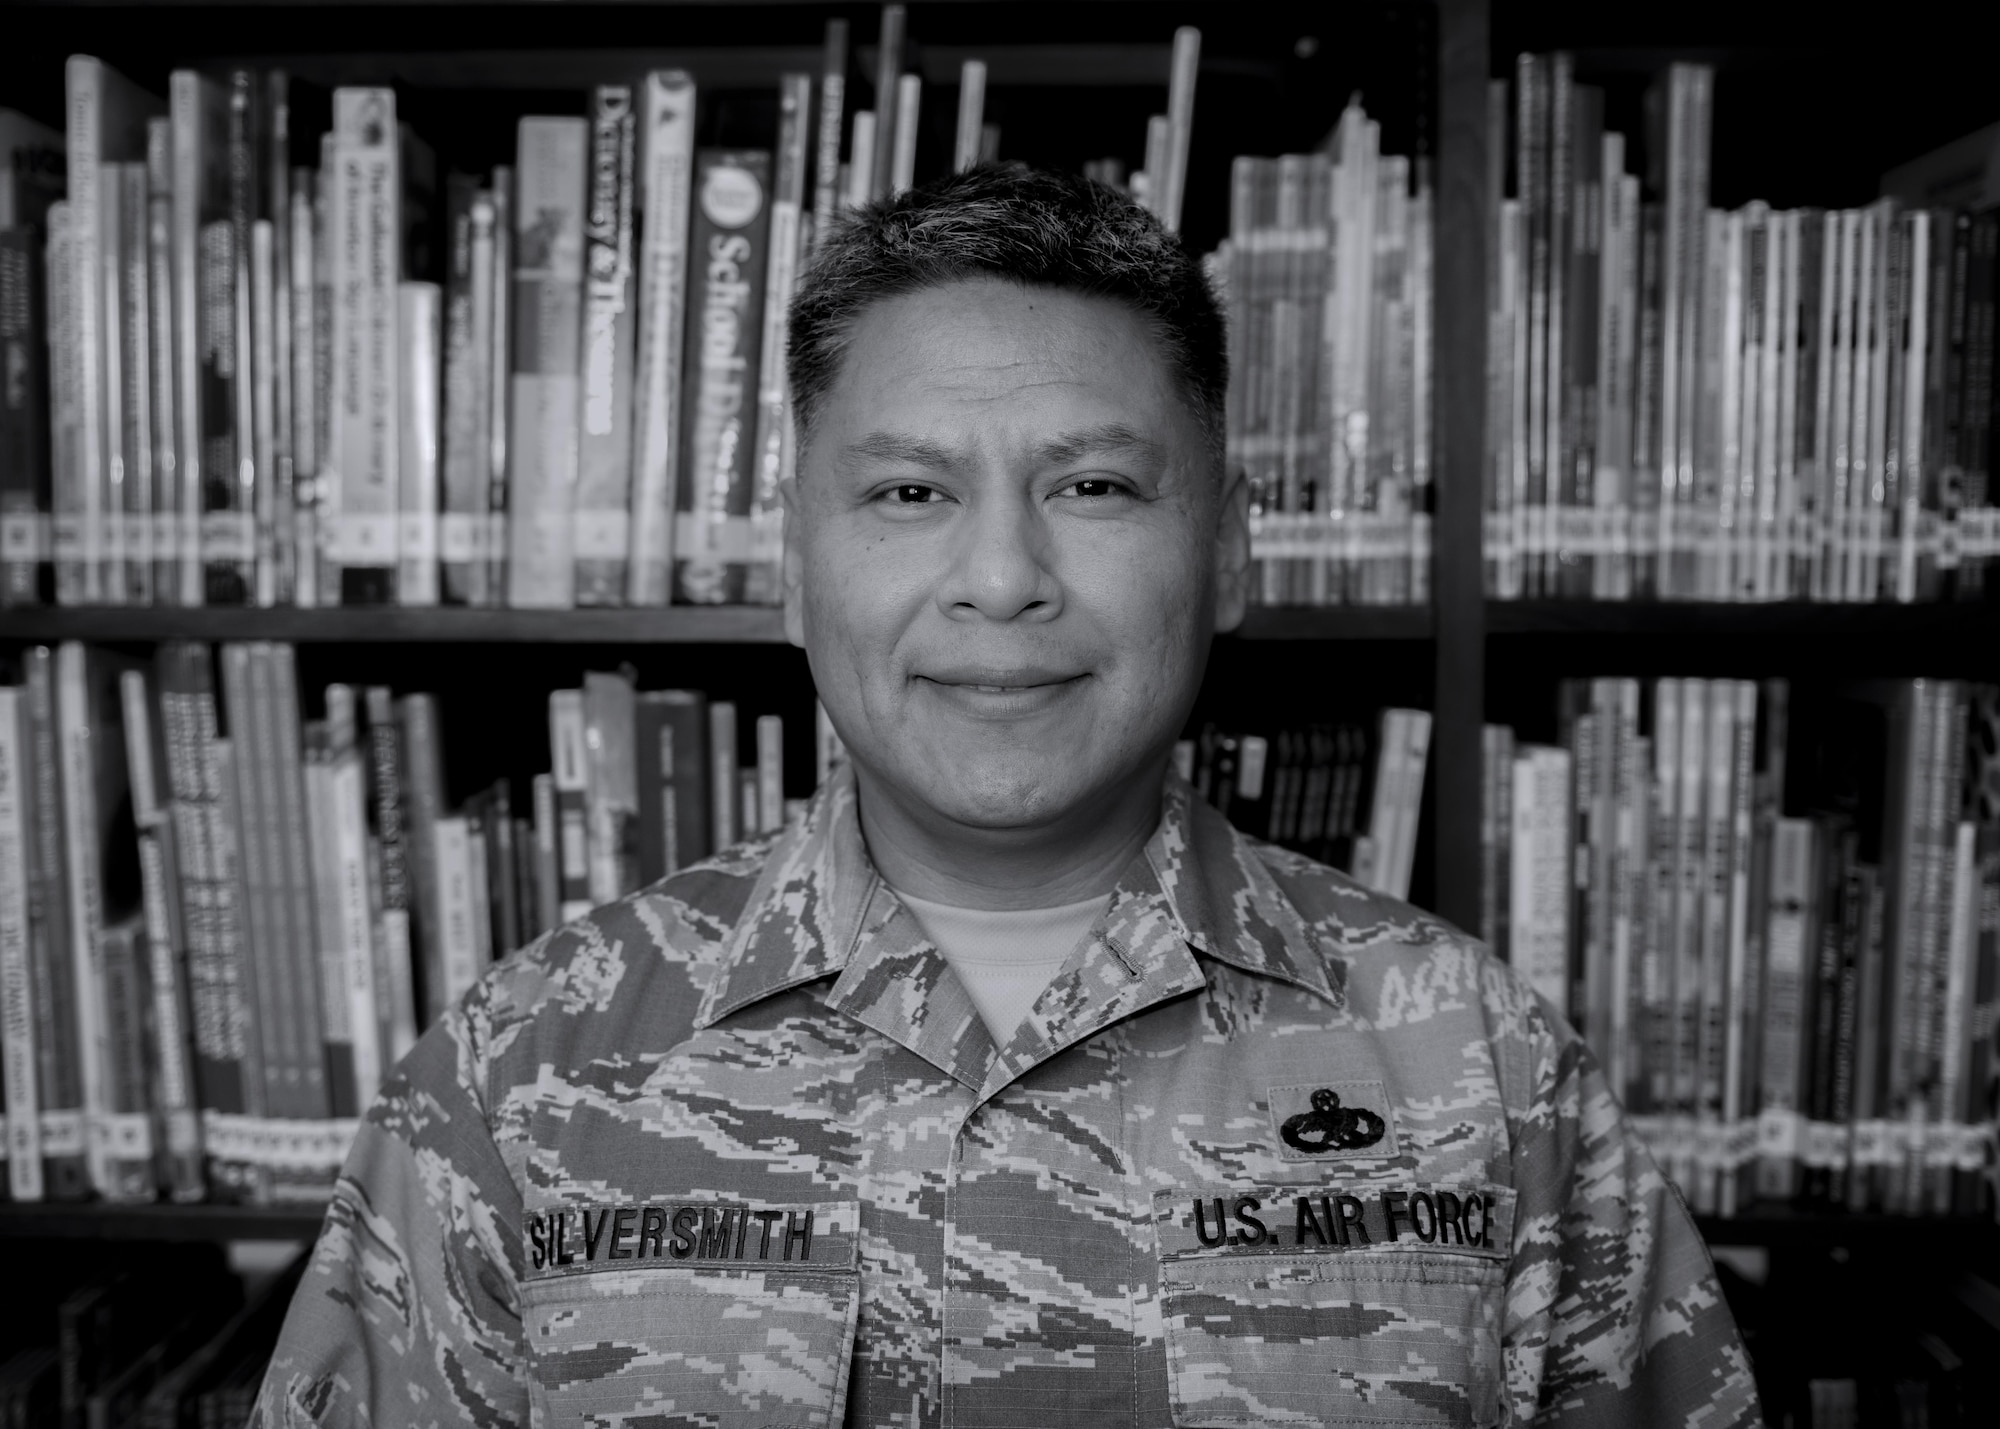 Master Sgt. Edward M. Silversmith, 374th Maintenance Squadron flight chief, poses for a photo at Mendel Elementary School on Nov. 30, 2016, at Yokota Air Base, Japan. Silversmith organized National American Indian Heritage Month events for the elementary schools on Yokota. (U.S. Air Force photo by Airman 1st Class Donald Hudson)